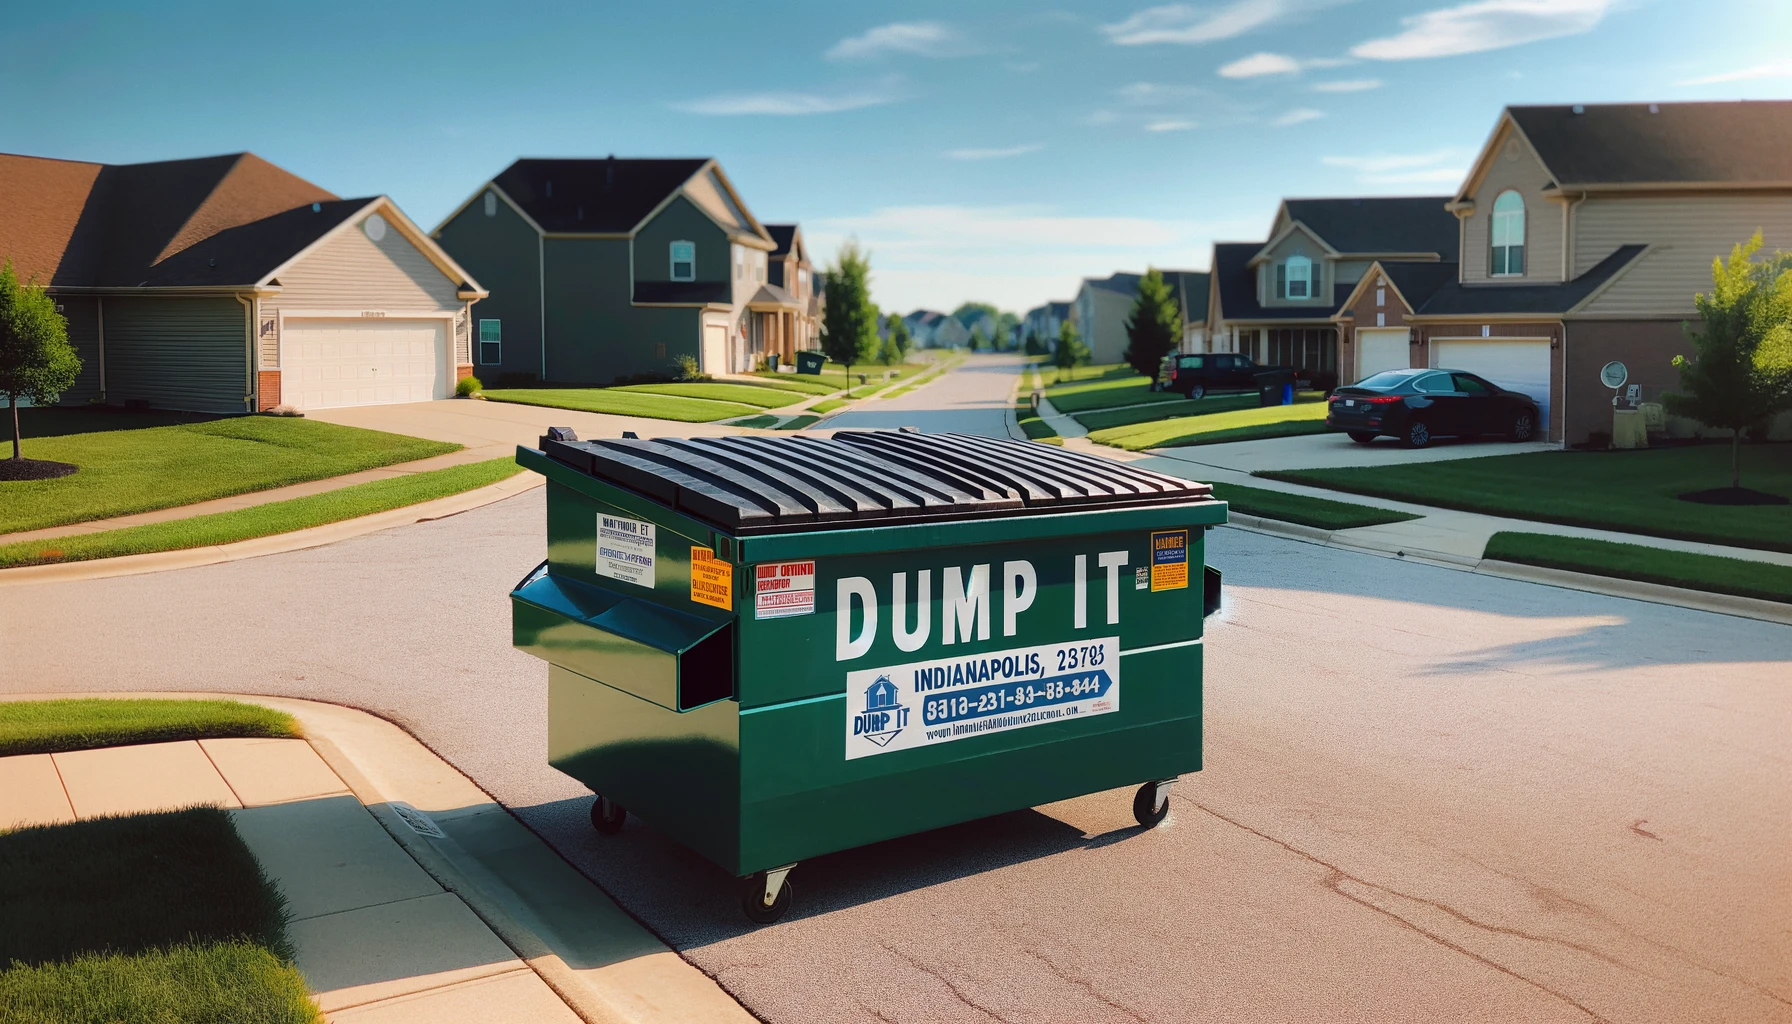 Green DUMP IT dumpster in a residential area in Indianapolis.